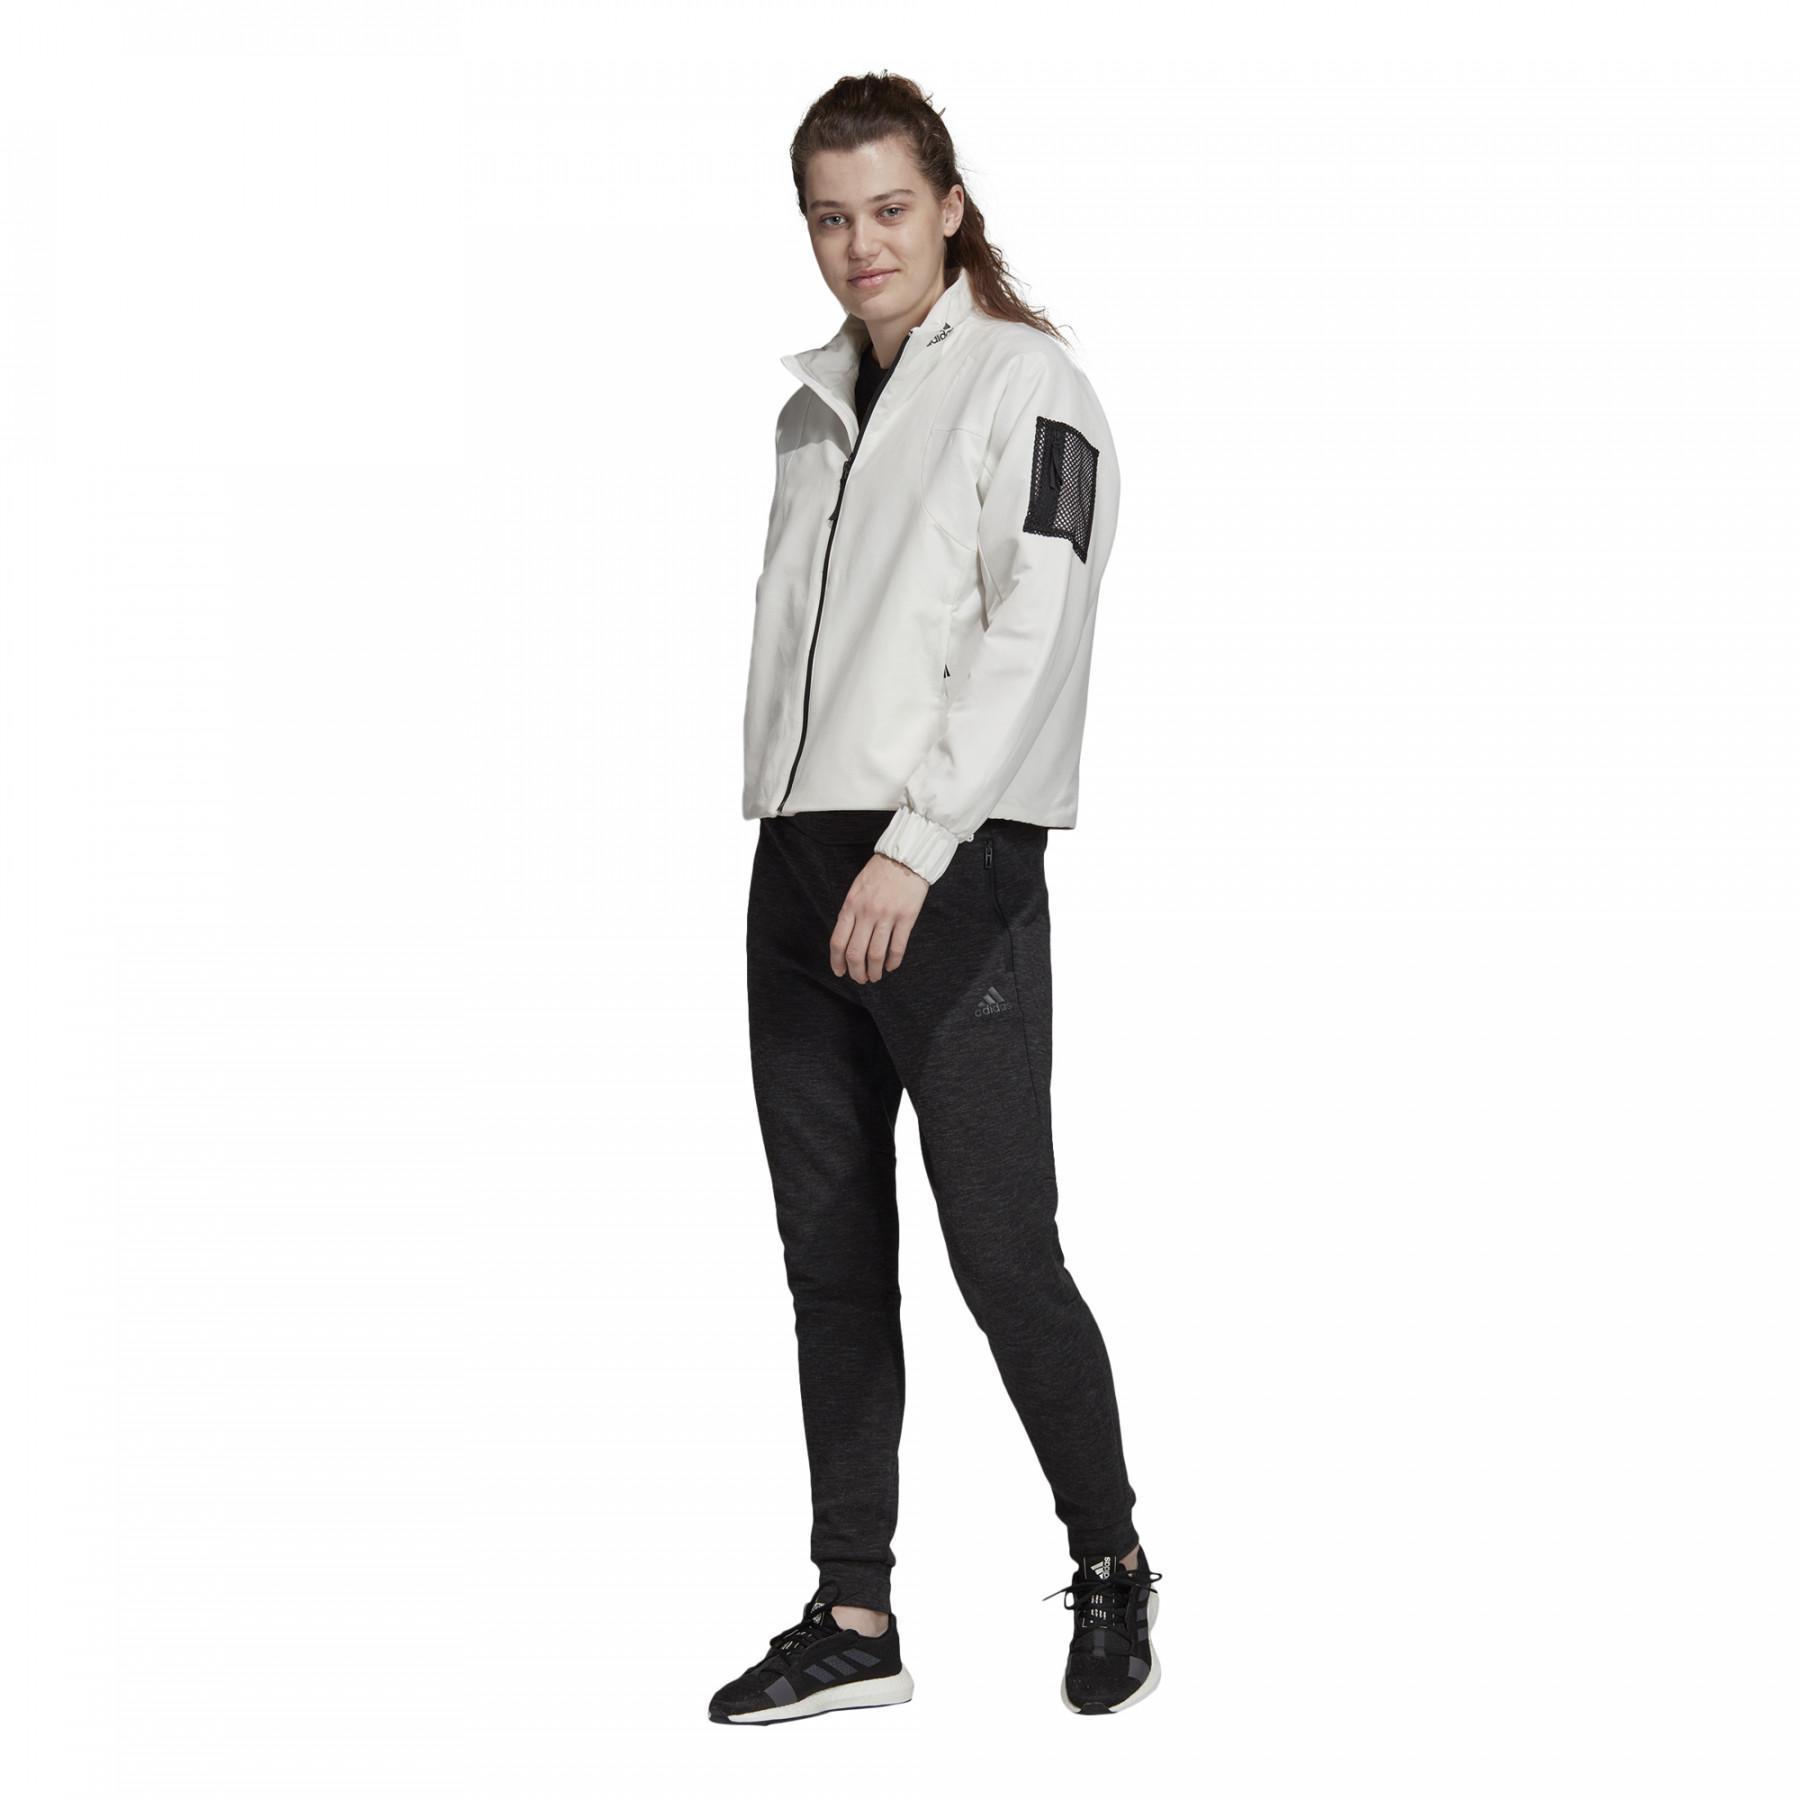 Women's jacket adidas Back-to-Sport Lined Insulation